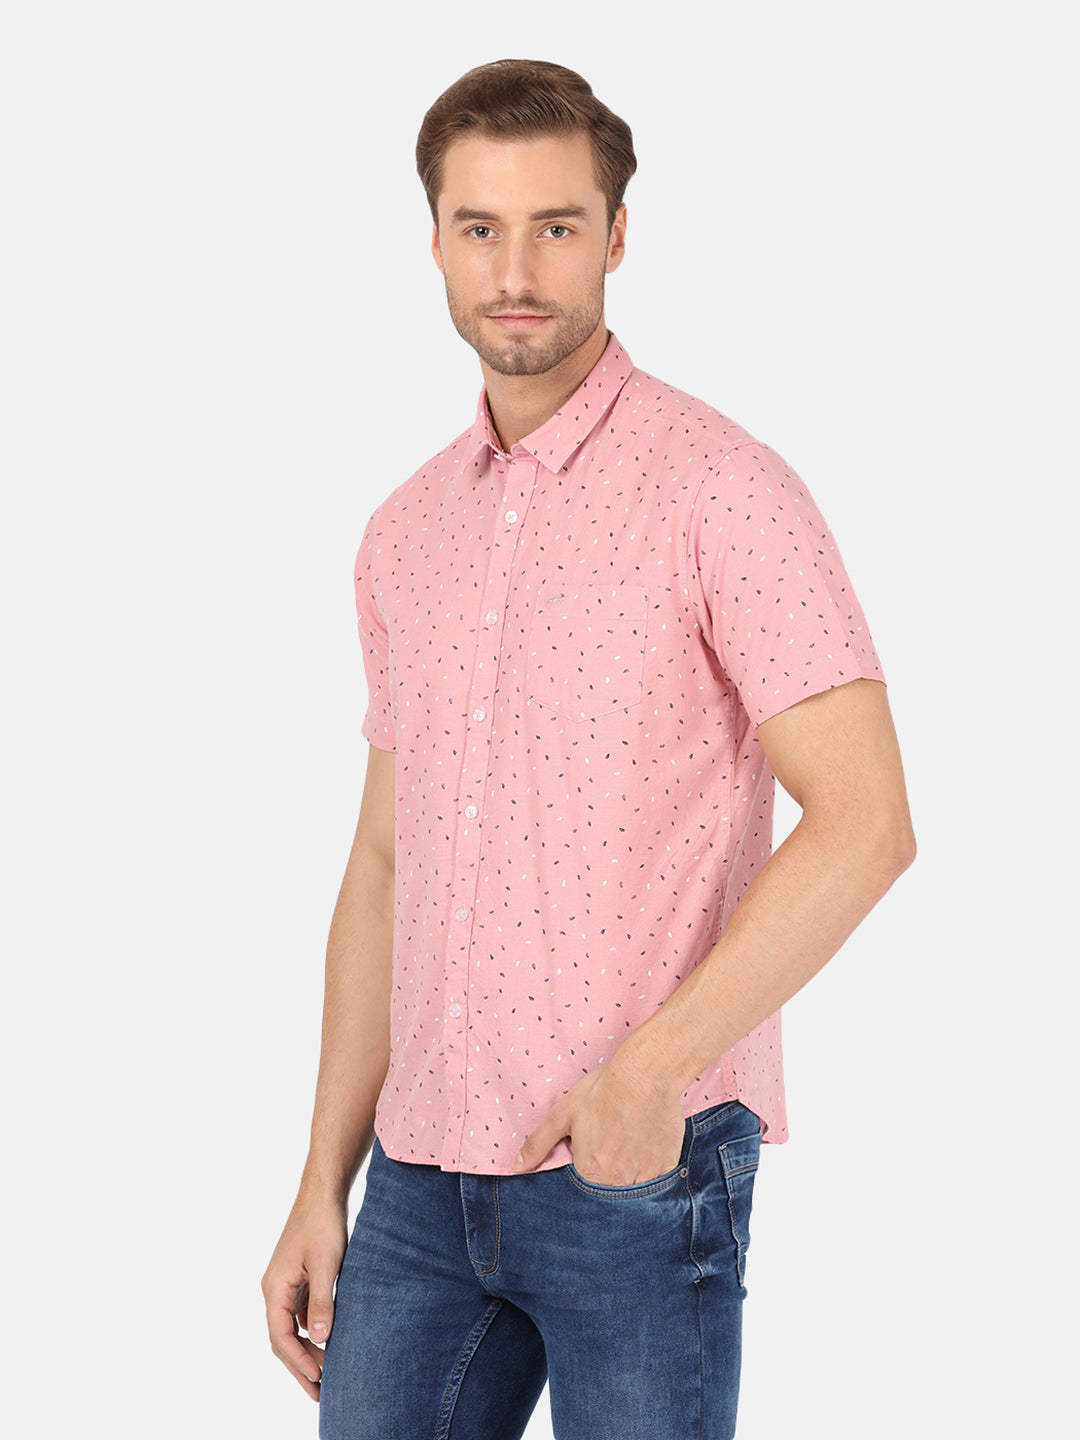 Crocodile Casual Half Sleeve Comfort Fit Printed Rose with Collar Shirt for Men